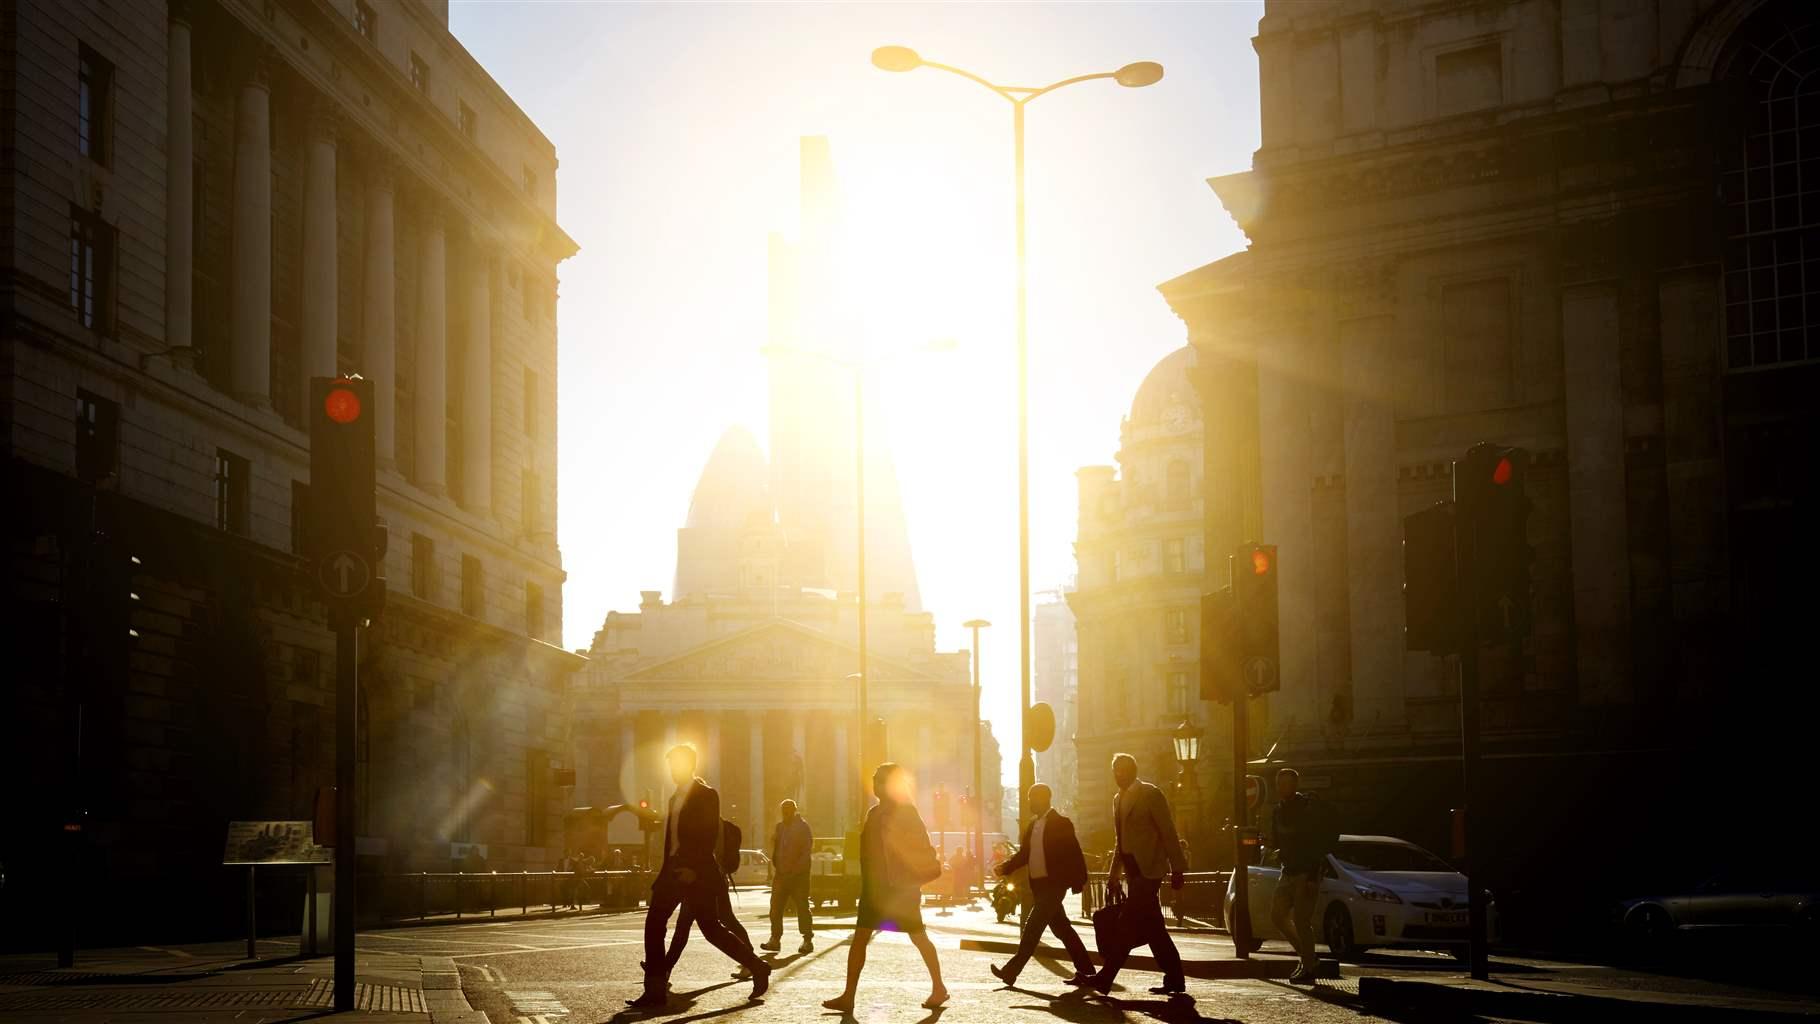 Pedestrians walking to work through the city at sunrise with rays of sun braking over the capitol building.